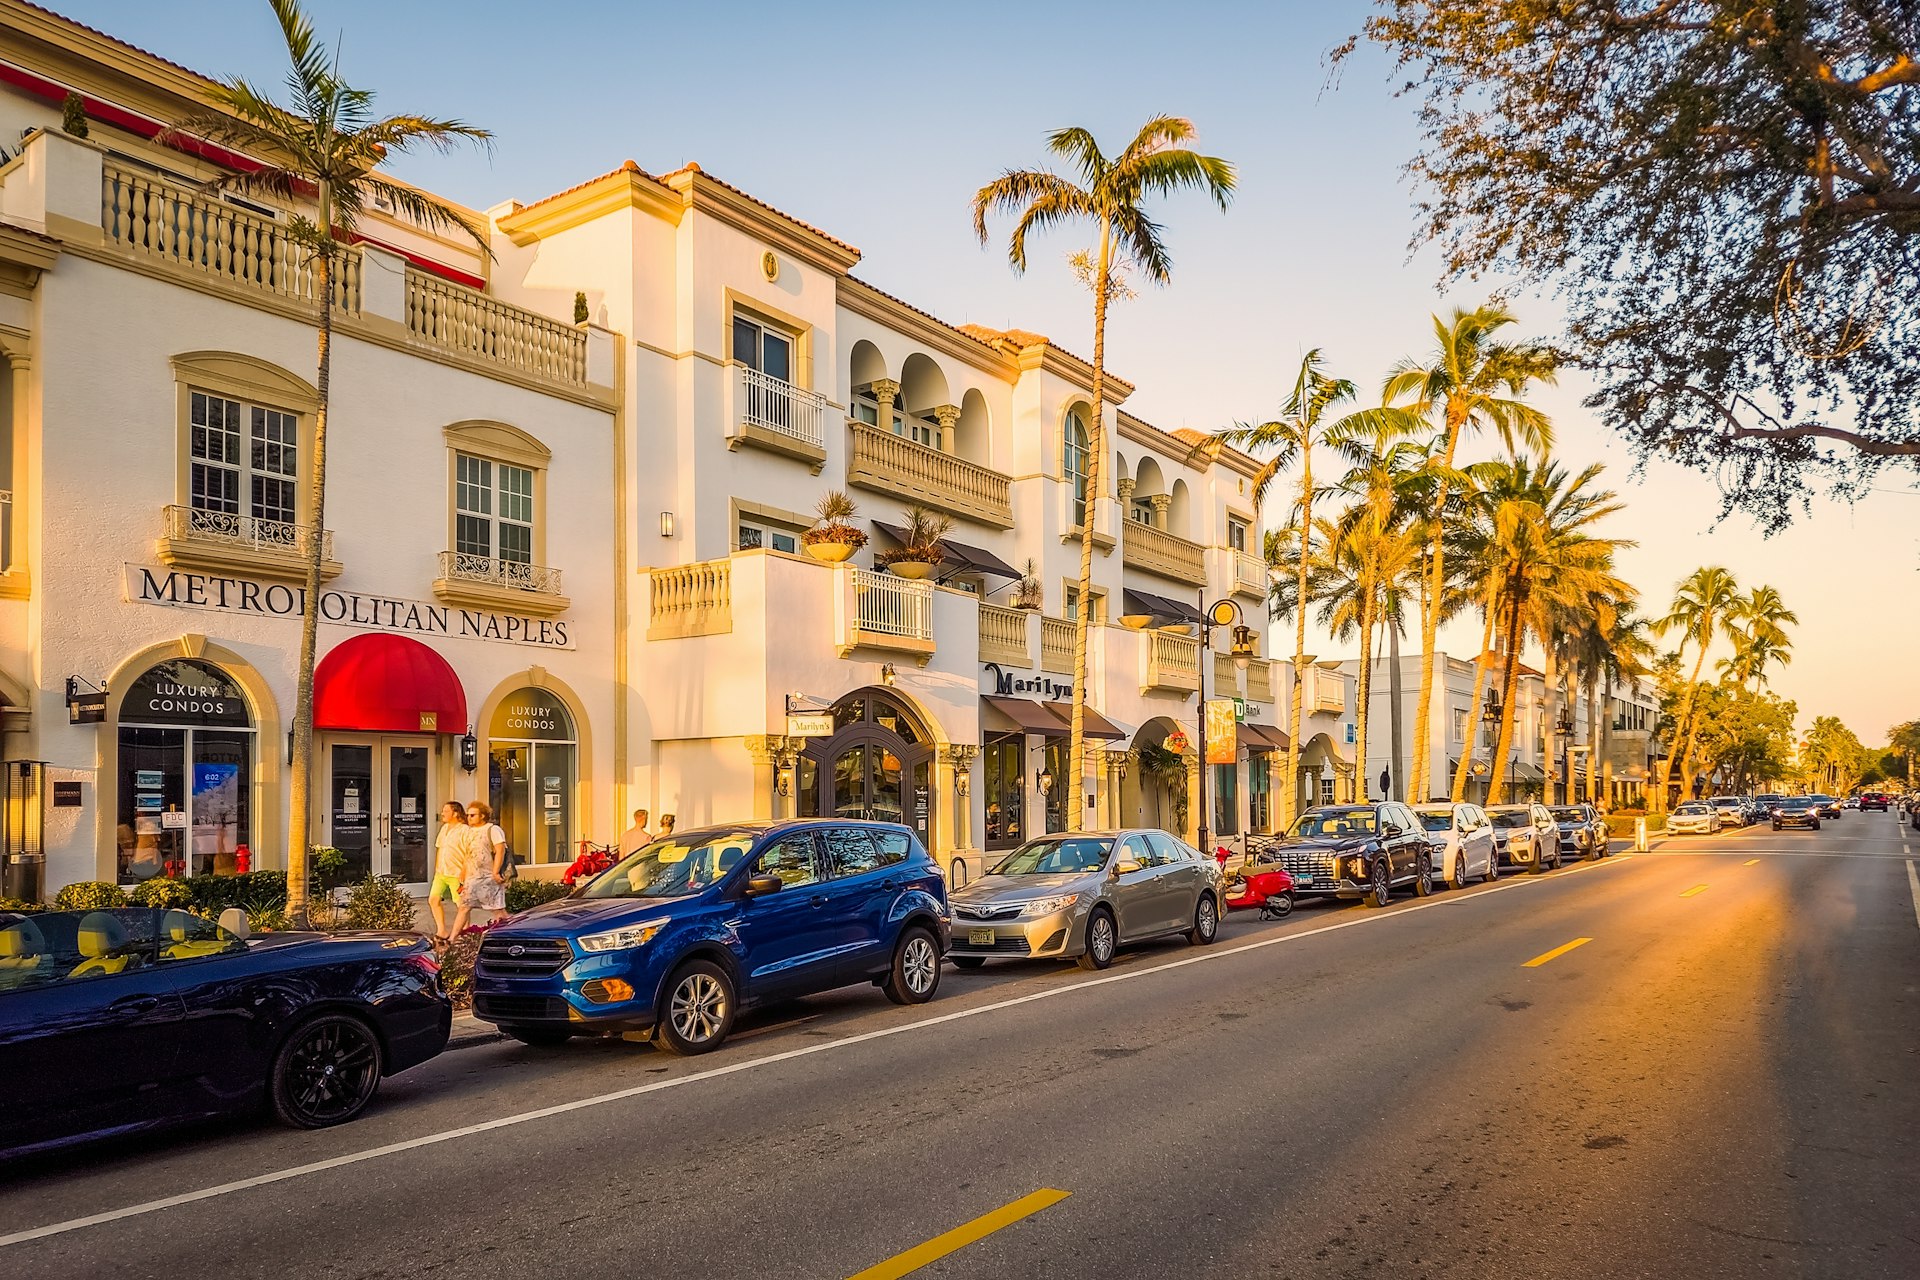 Cars are parked alongside white buildings on a street lined with palm trees at sunset